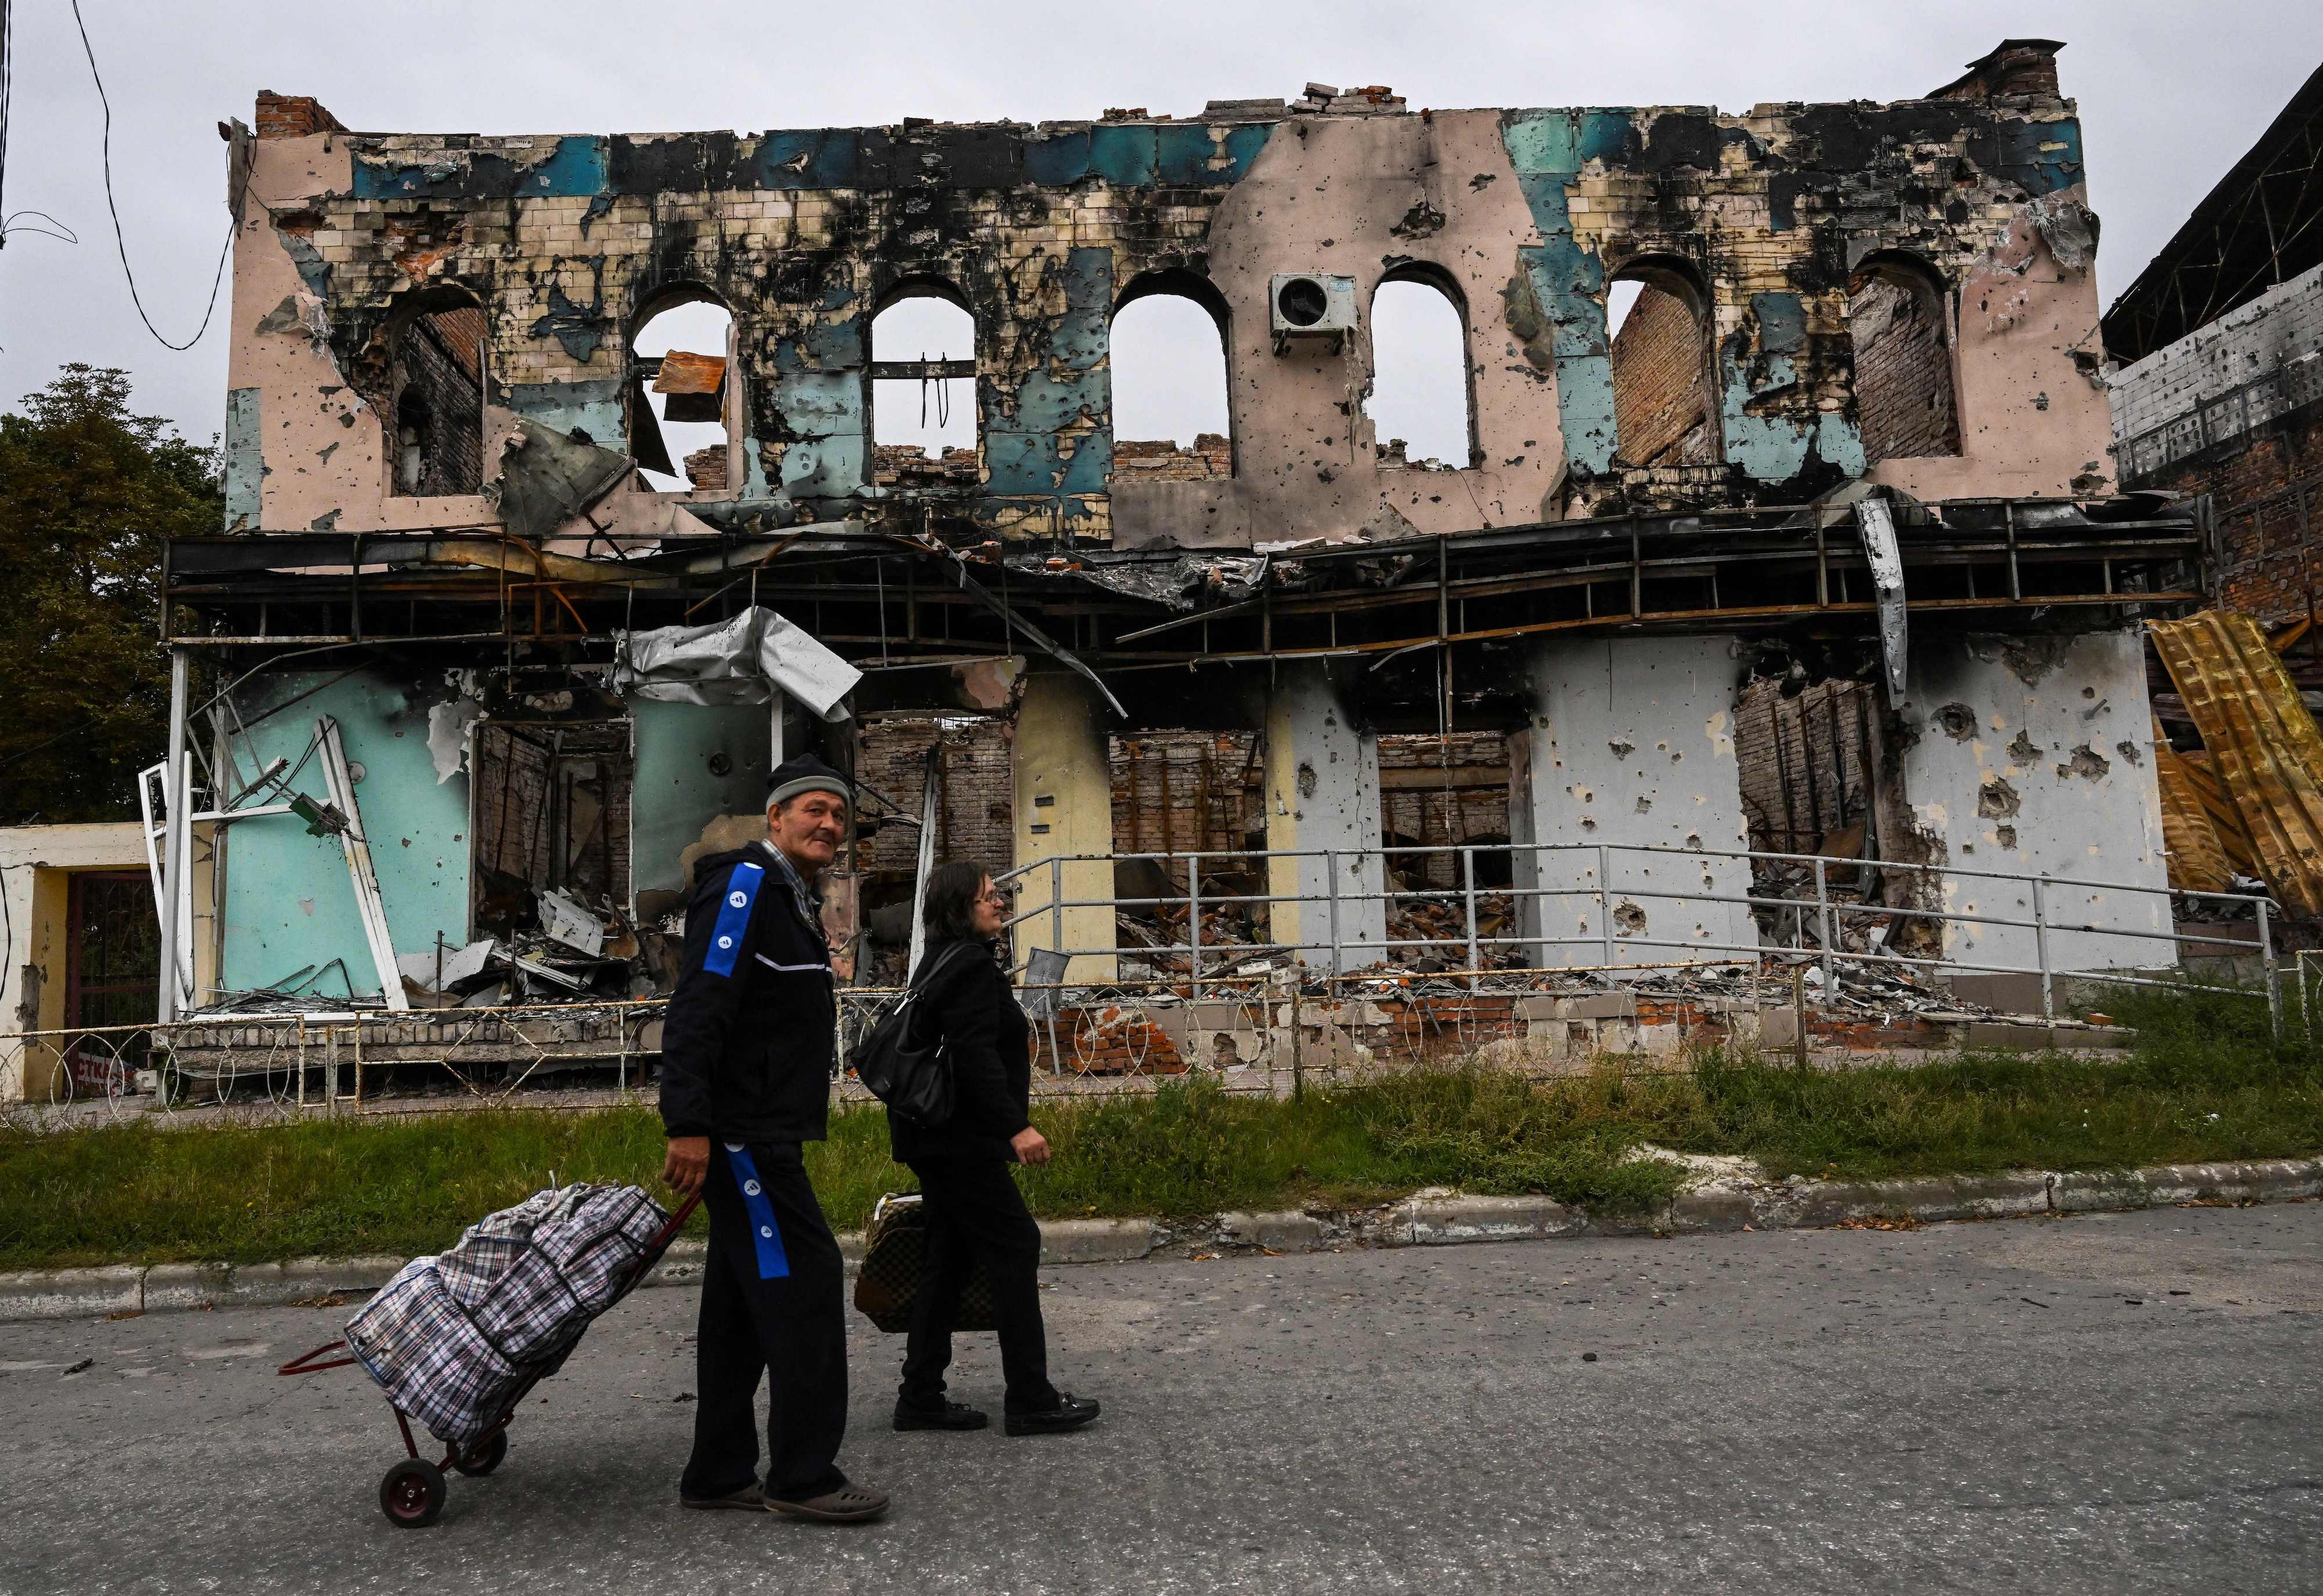 A couple wheels suitcases as they walk in front of a destroyed building in Izyum, Kharkiv Oblast on September 11.